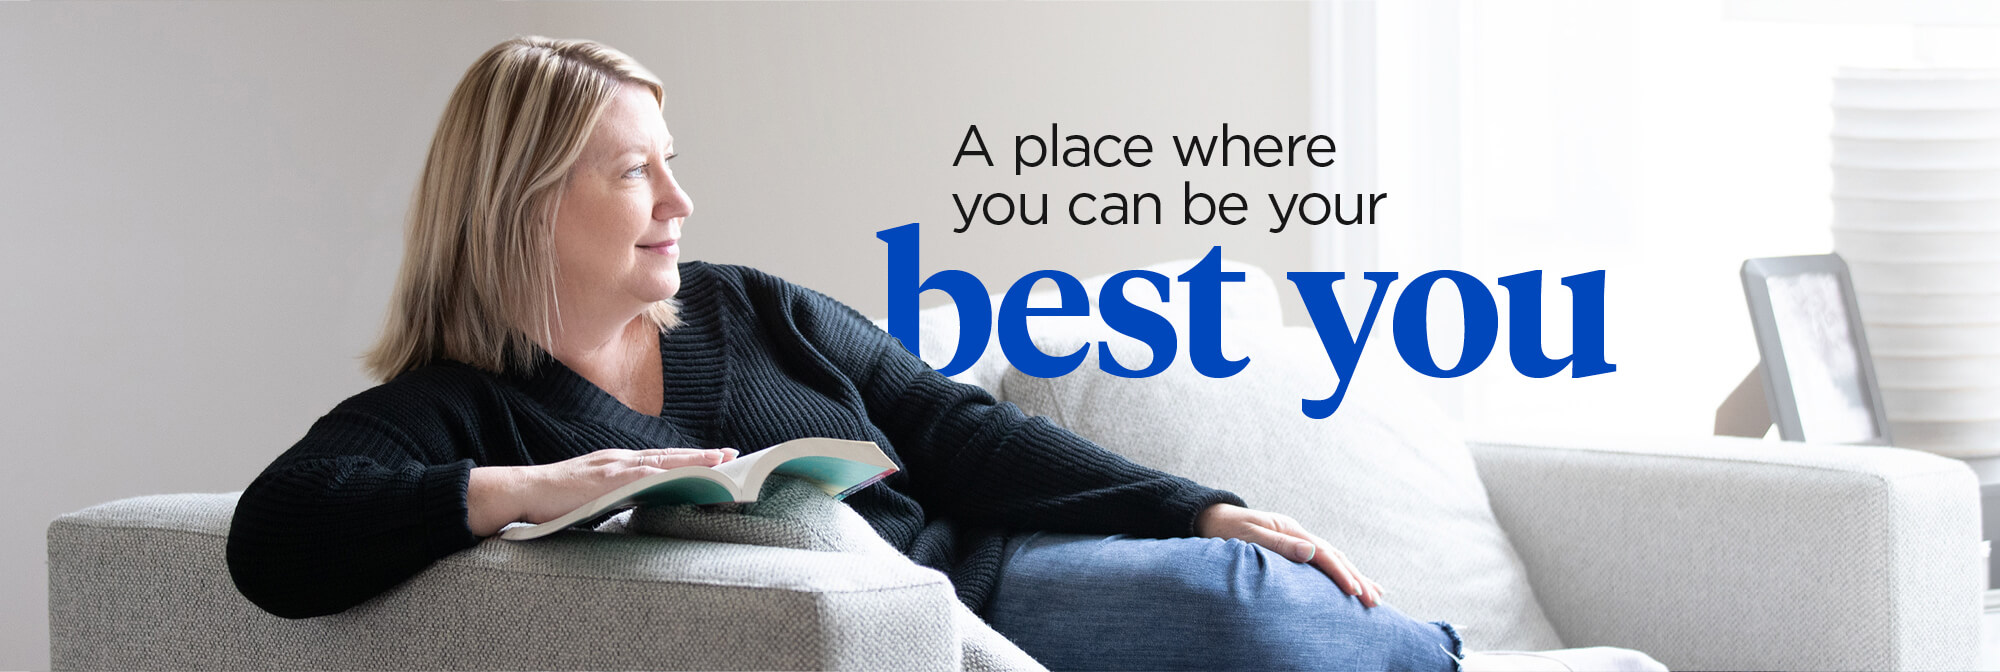 Jill - A place where you can be your best you